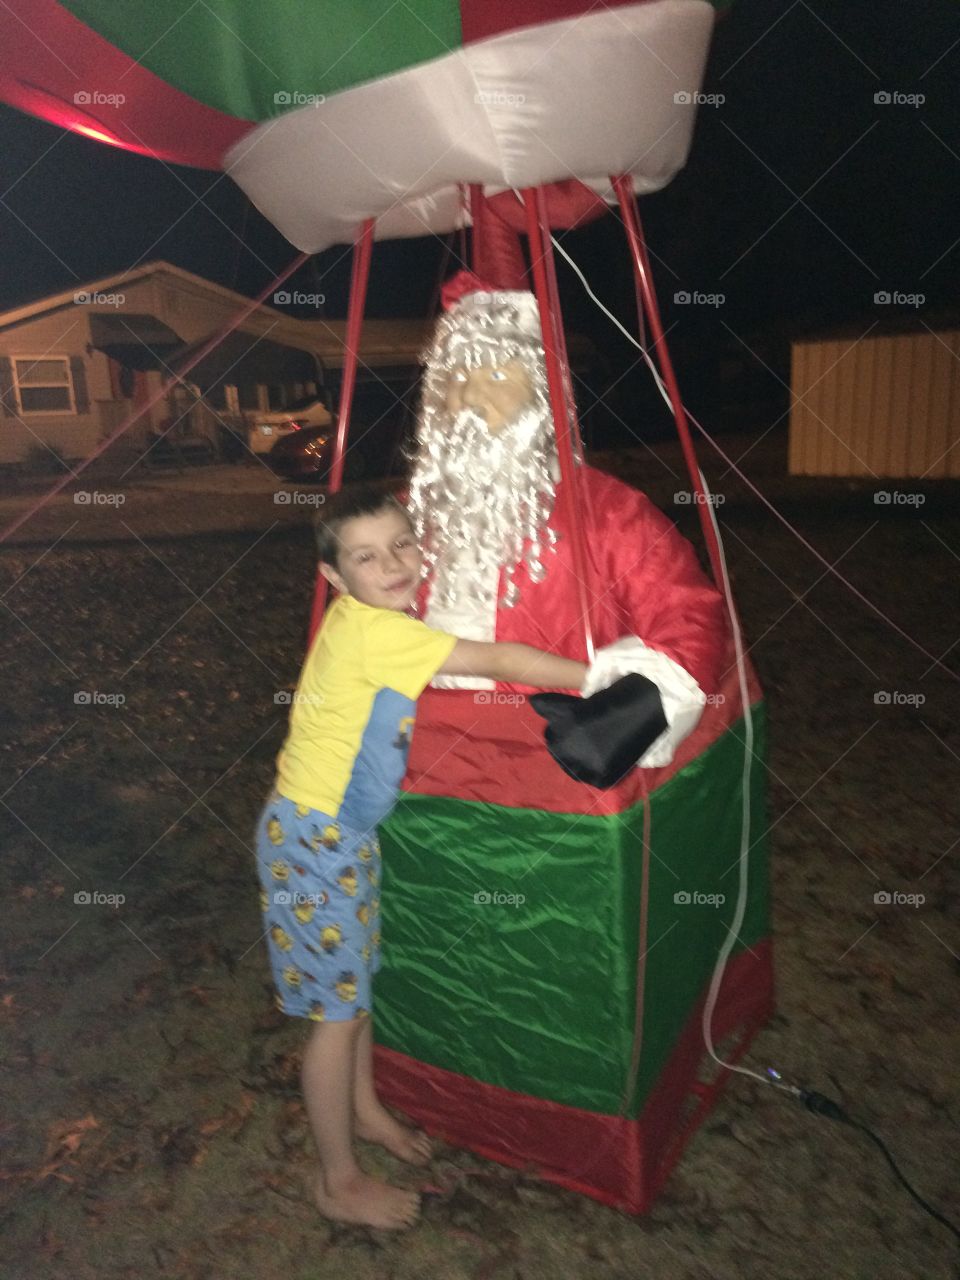 My son Caleb hugging our inflatable Santa the night before Christmas he’s absolutely an amazing sweet child .